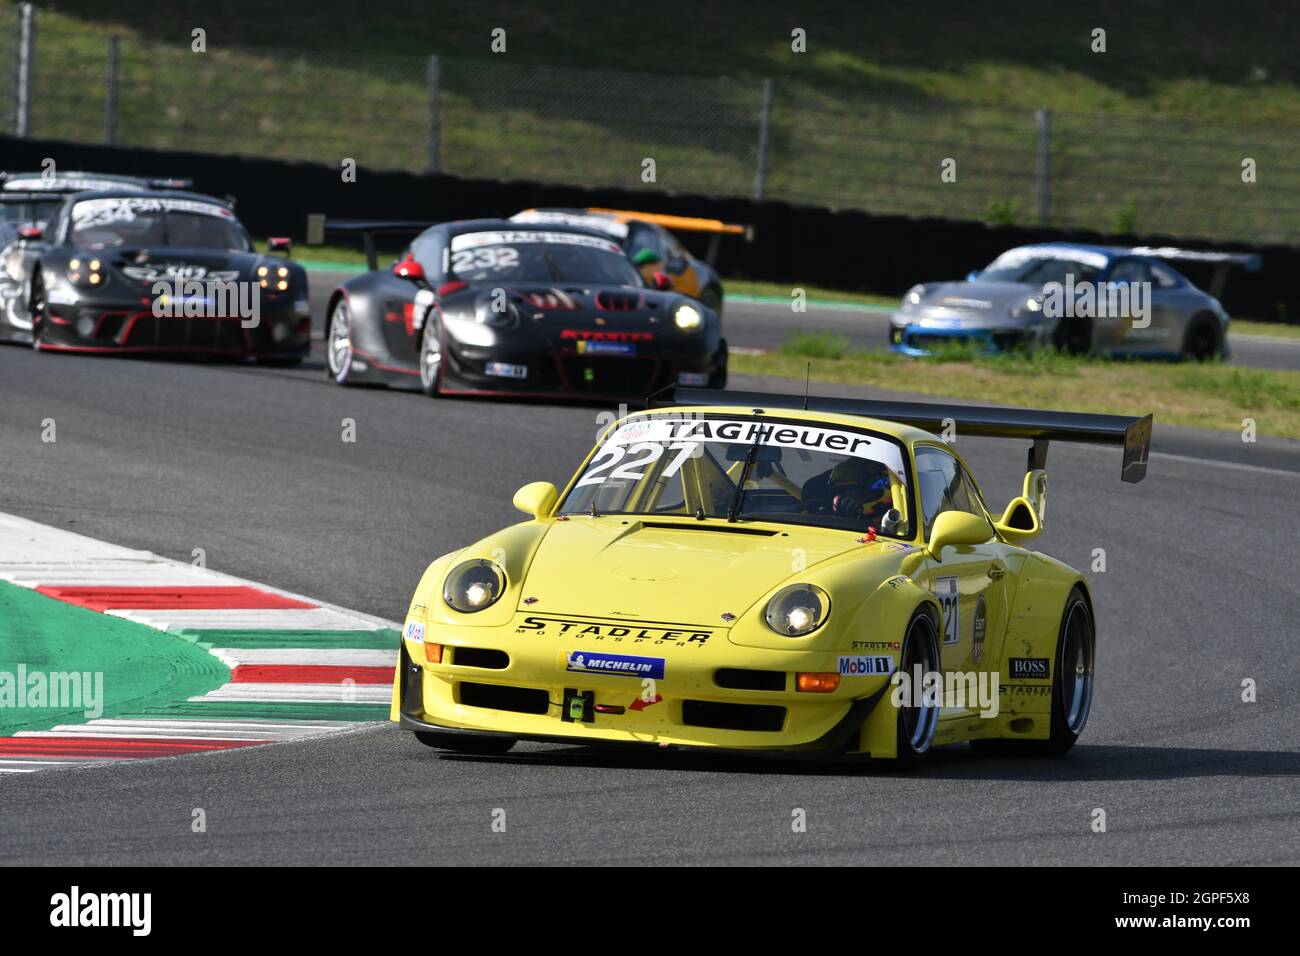 Mugello Circuit, Italy - 23 September 2021: Porsche 993 GT2 R in action at Mugello Circuit during Porsche Sports Cup Suisse event 2021 driven by unkno Stock Photo